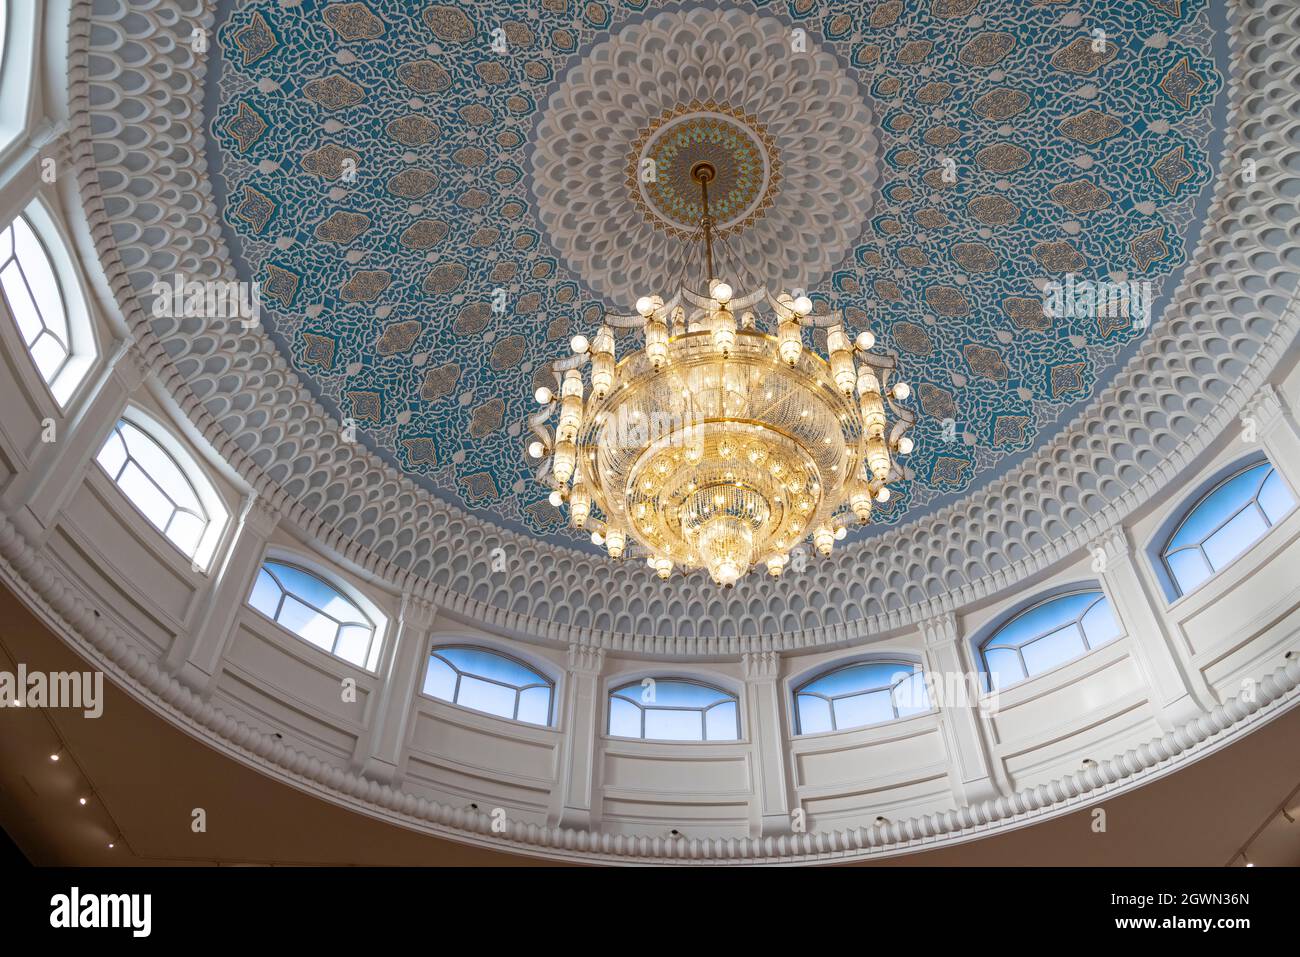 detail of dome, The Fine Arts Gallery of the National Bank of Uzbekistan, also known as the Art Gallery of Uzbekistan, Tashkent, Uzbekistan Stock Photo